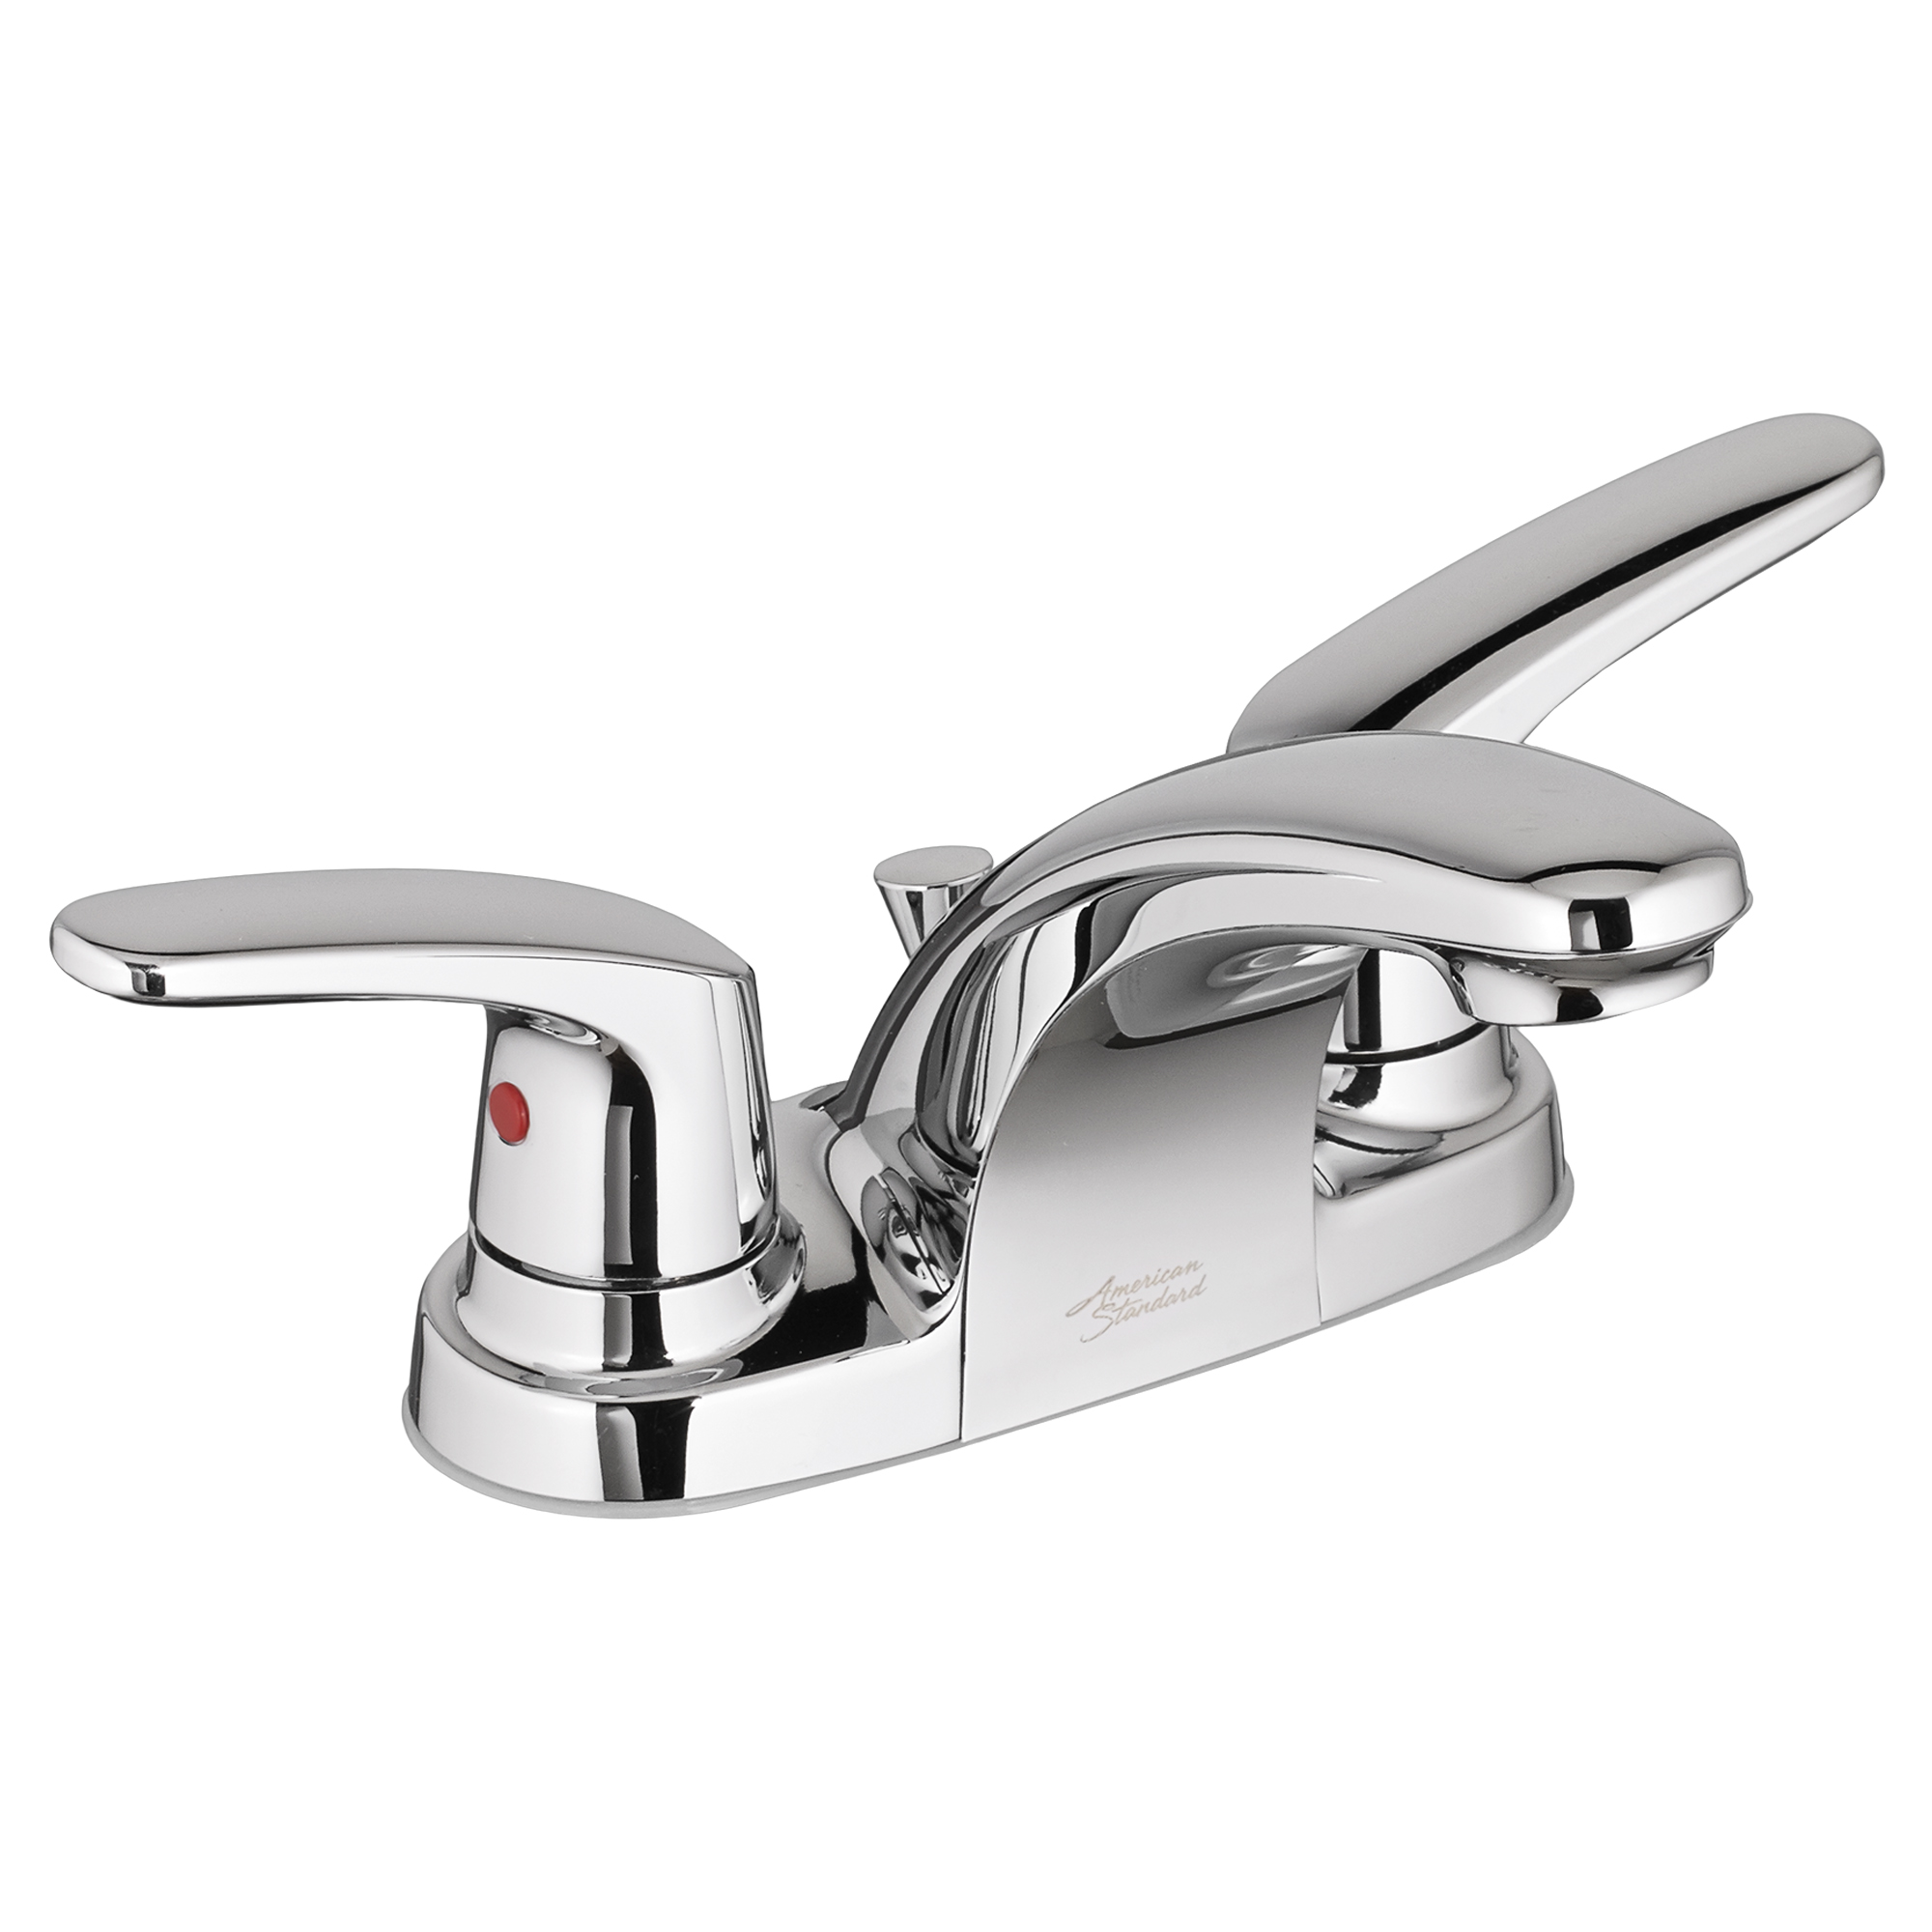 Colony® PRO 4-Inch Centerset 2-Handle Bathroom Faucet 1.2 gpm/4.5 Lpm Less Drain, With Lever Handles